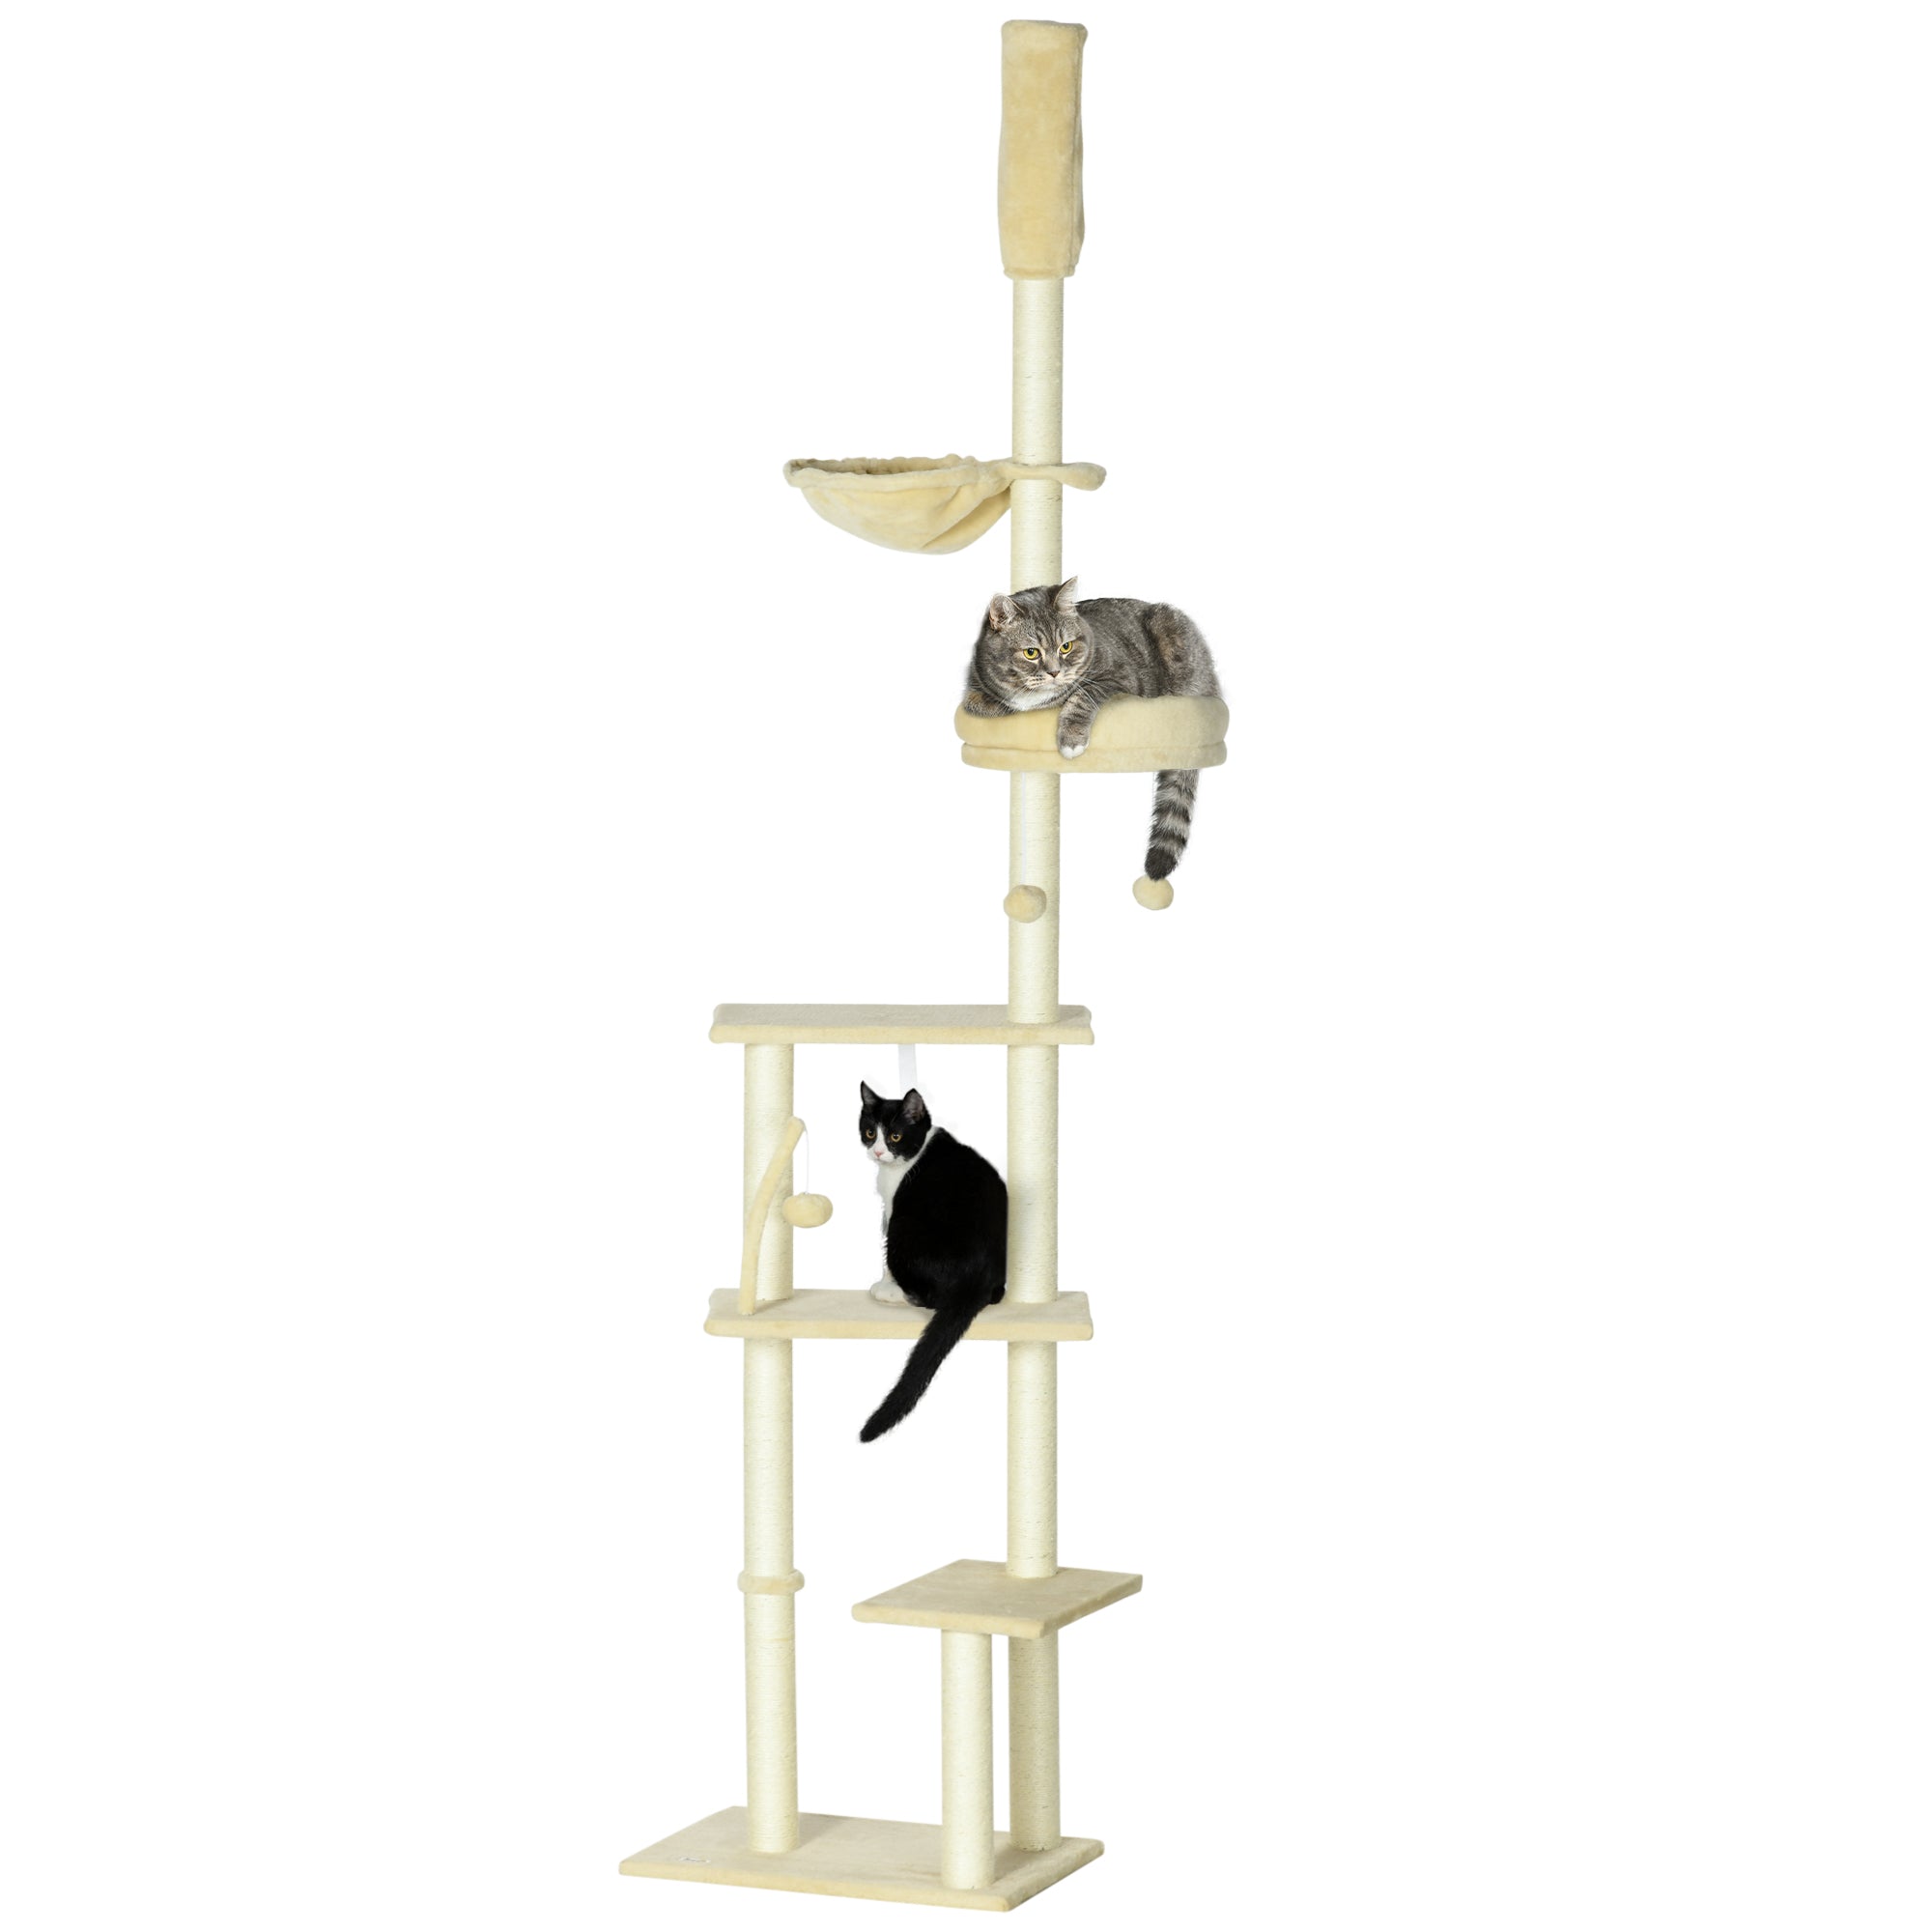 Floor to Ceiling Cat Tree, 6-Tier Play Tower Climbing Activity Center w/ Scratching Post, Hammock, Adjustable Height 230-250cm, PawHut, Beige